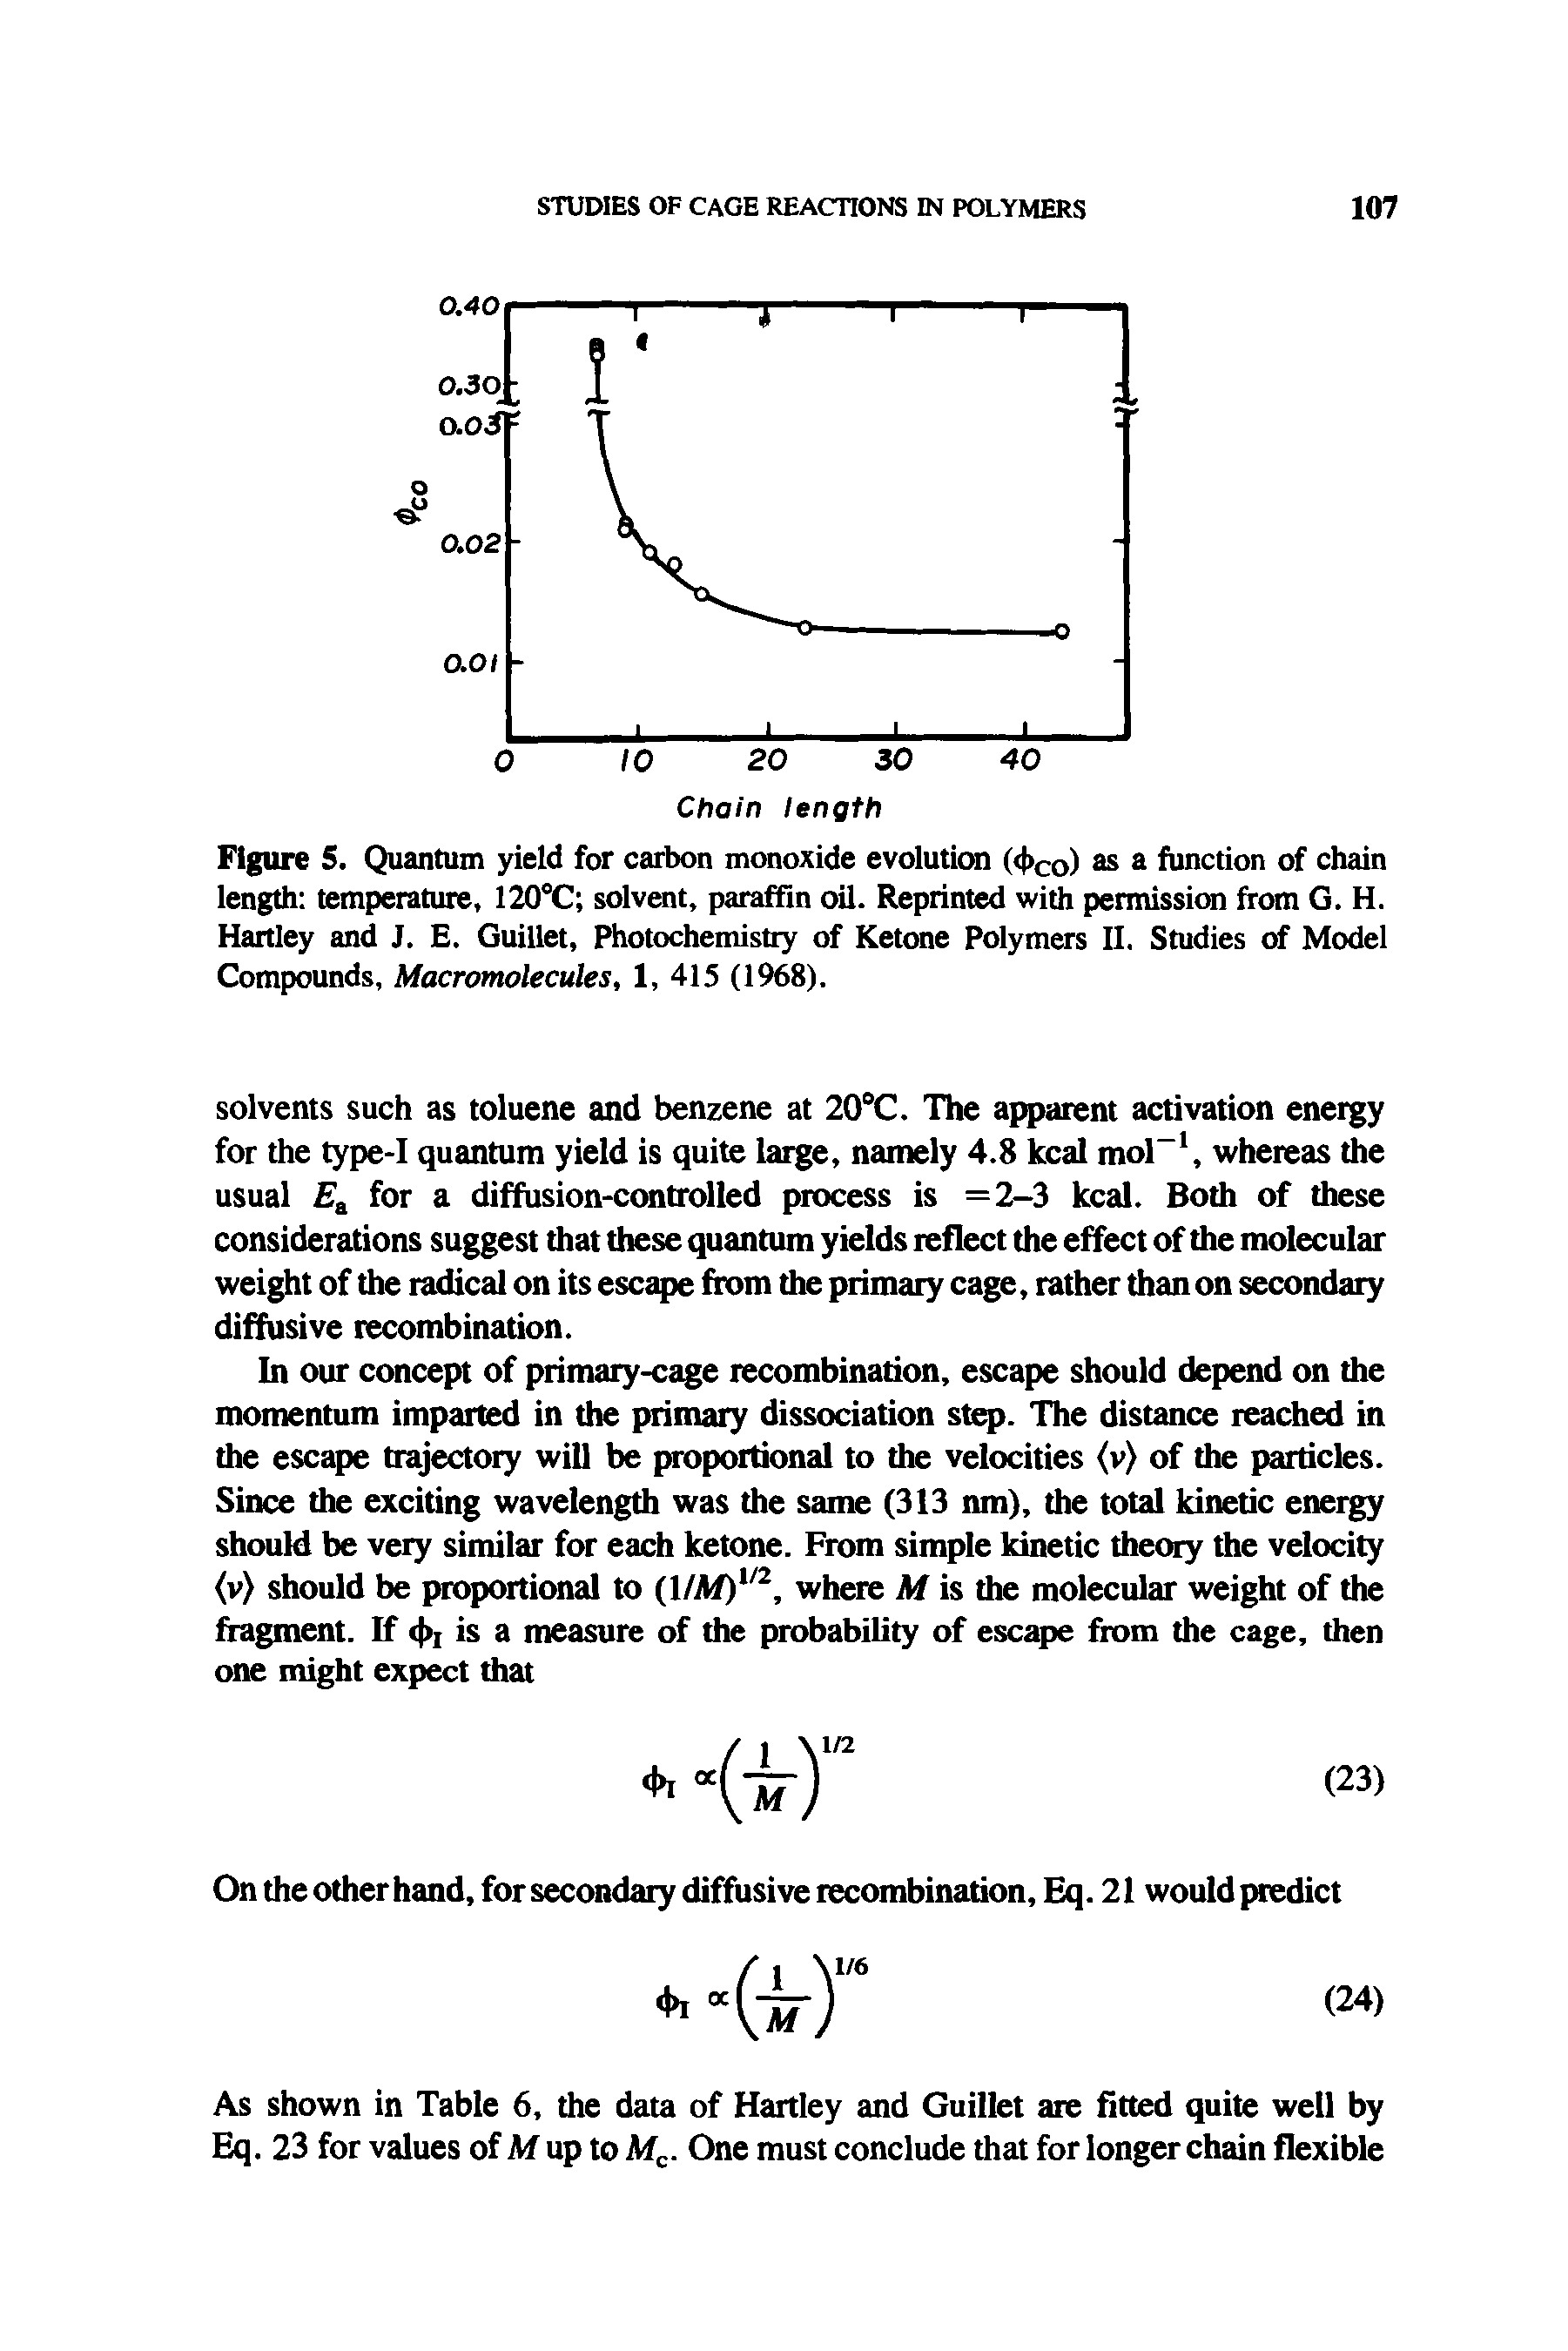 Figure 5. Quantum yield for carbon monoxide evolution (< >co) function of chain length temperature, 120°C solvent, paraffin oil. Reprinted with permission from G. H. Hartley and J. E. Guillet, Photochemistry of Ketone Polymers II. Studies of Model Compounds, Macromolecules, 1, 415 (1968).